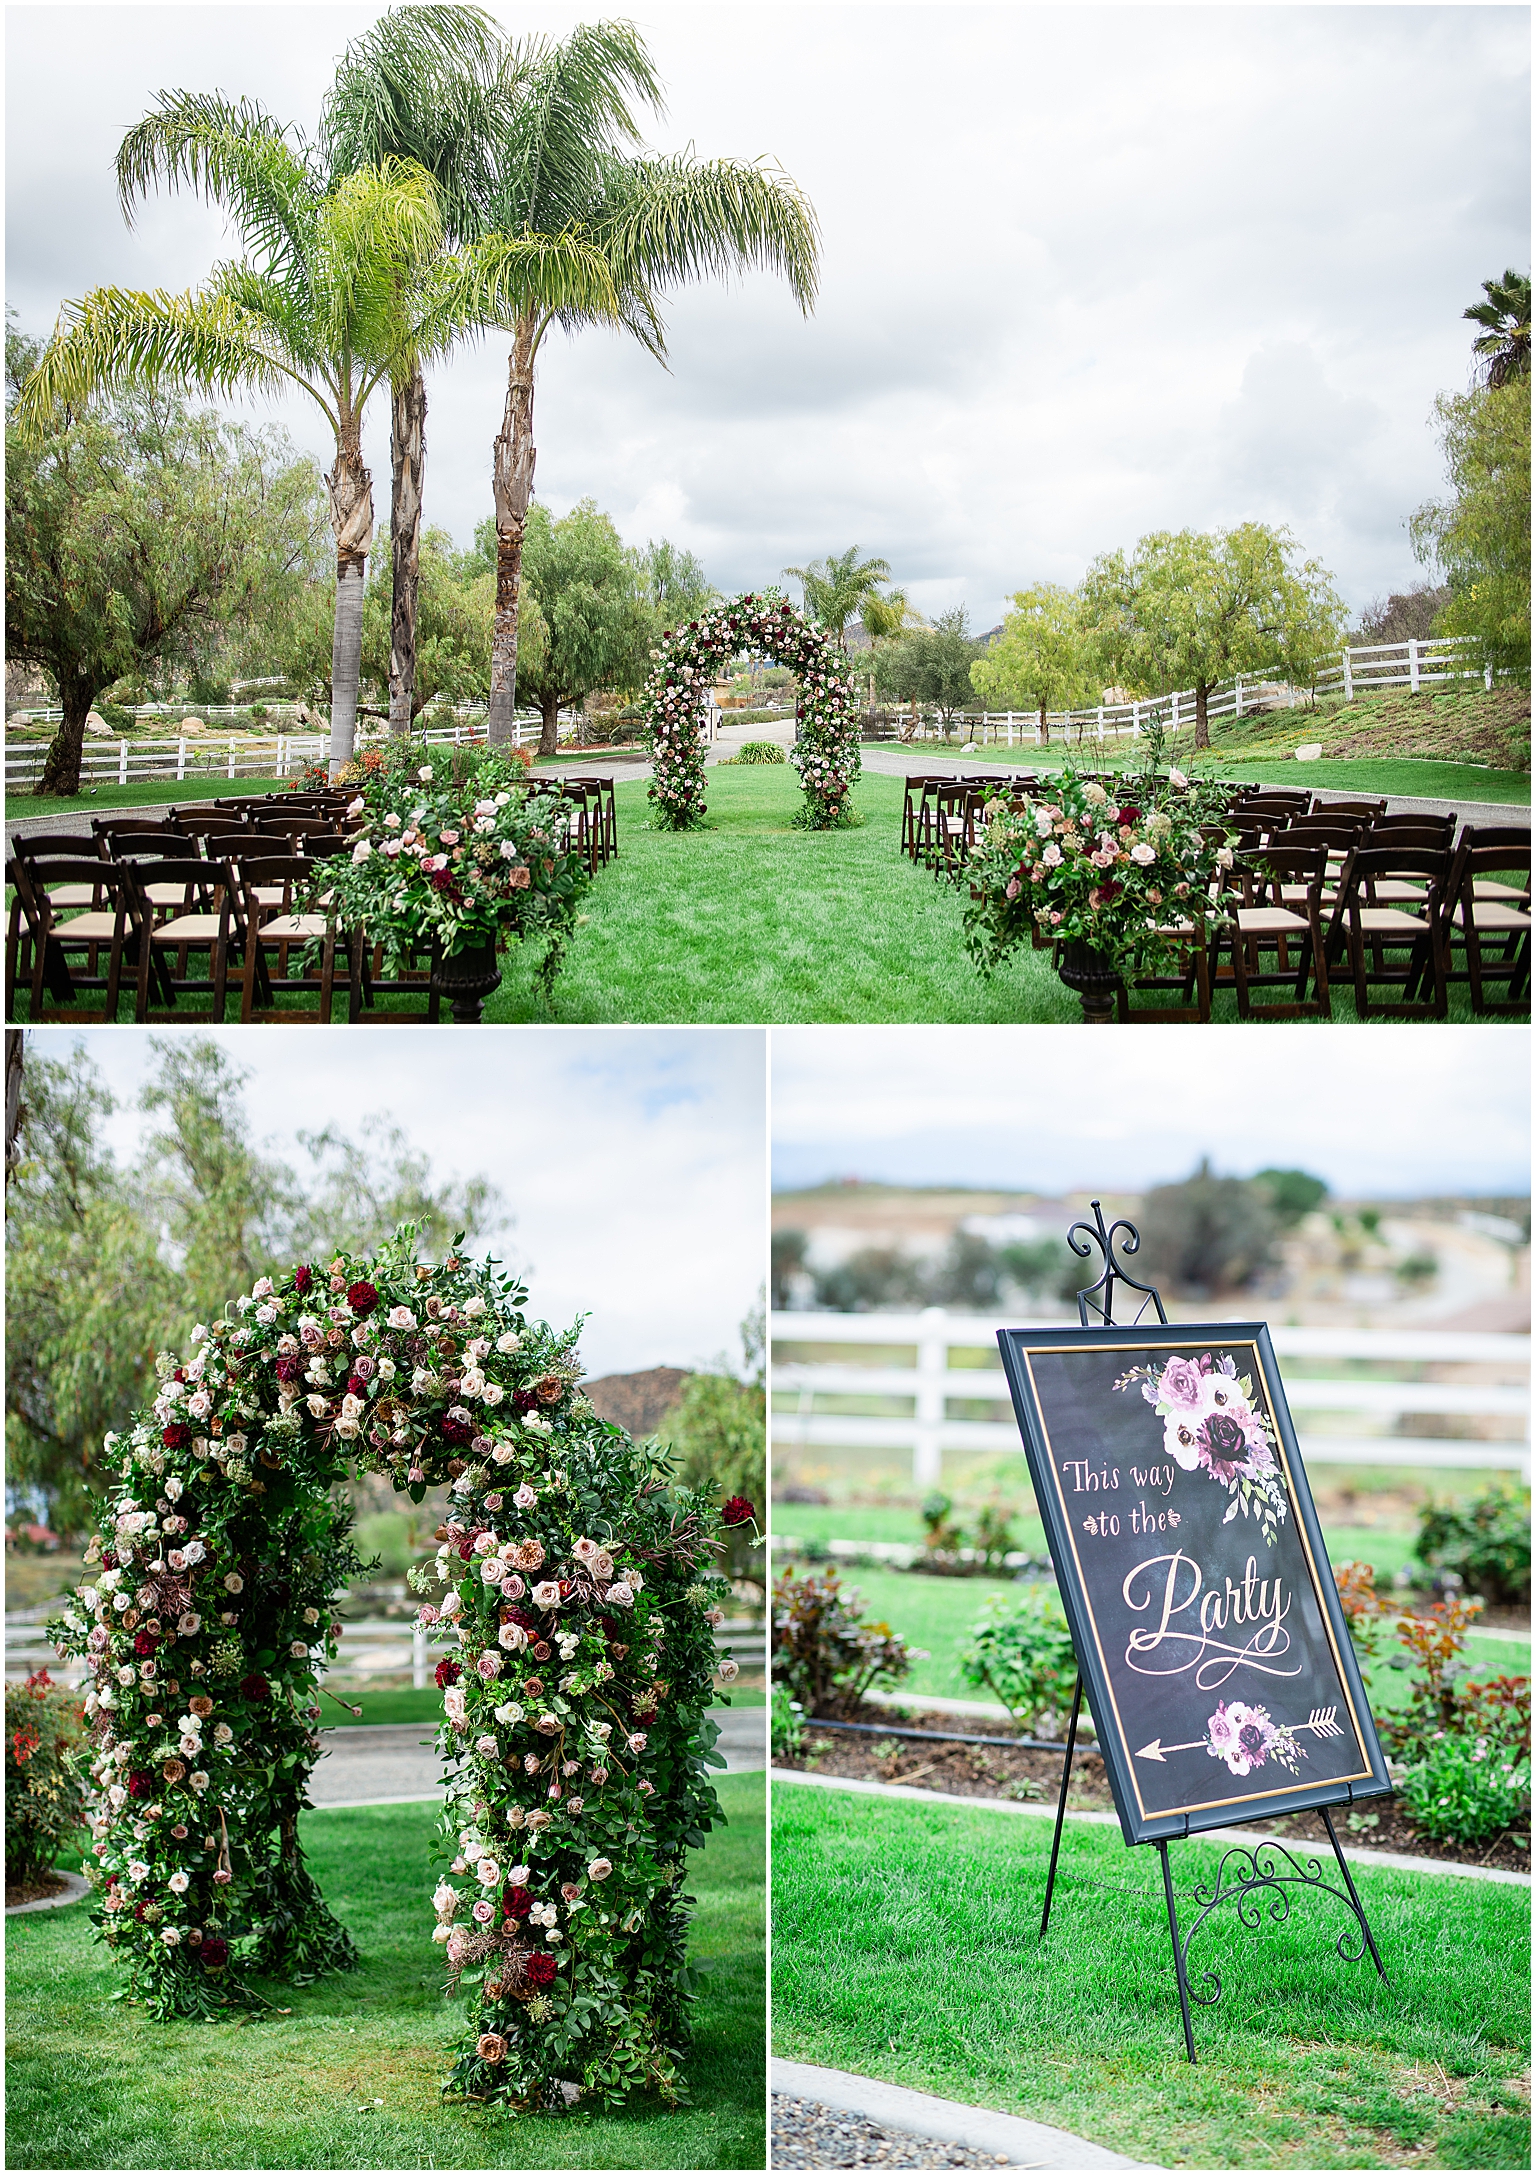 Stunning wedding ceremony set up at a Temecula wine country private estate